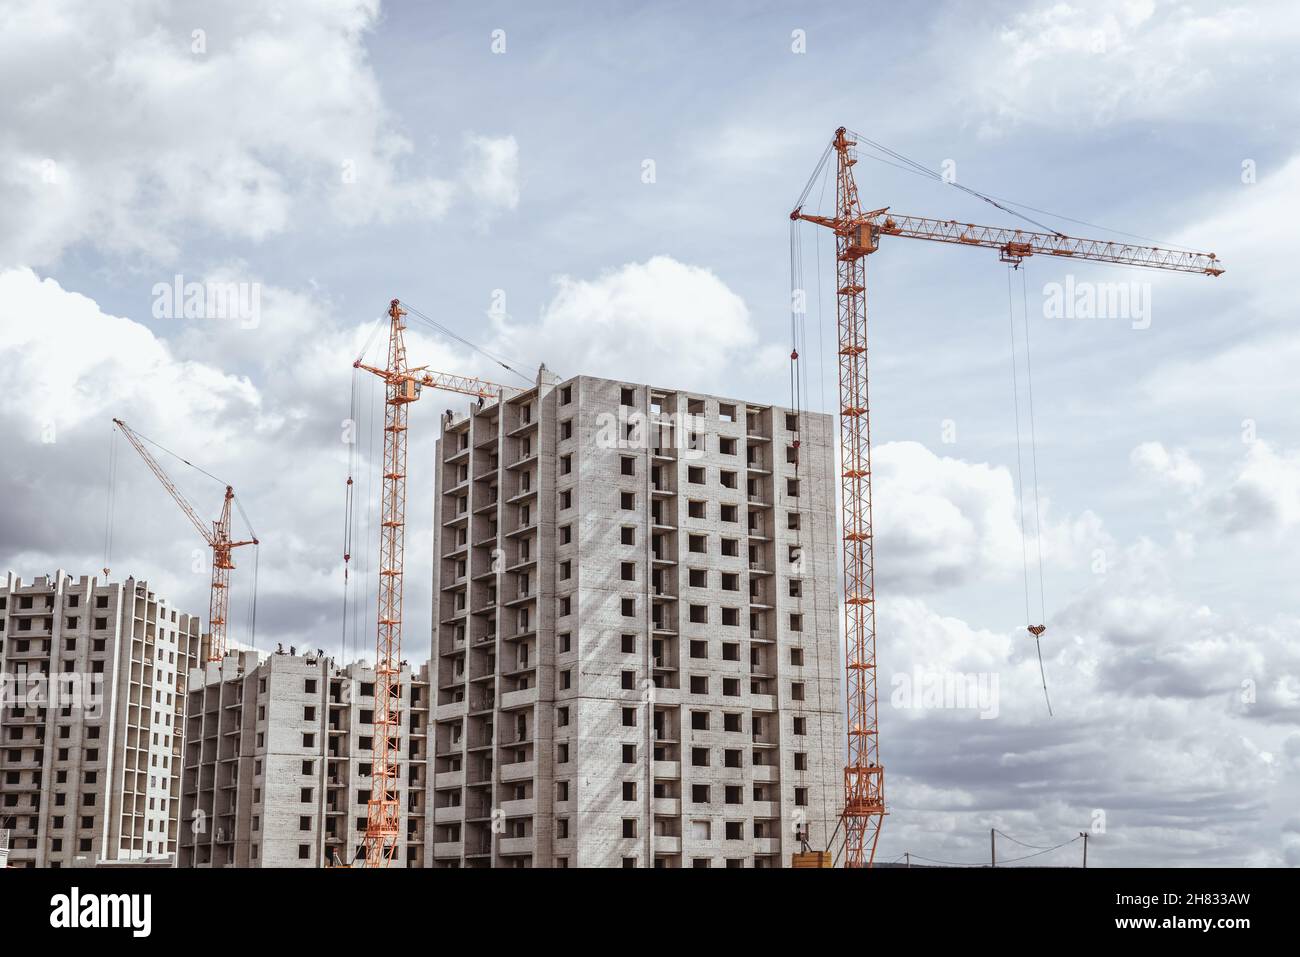 Huge cranes working on construction site Stock Photo